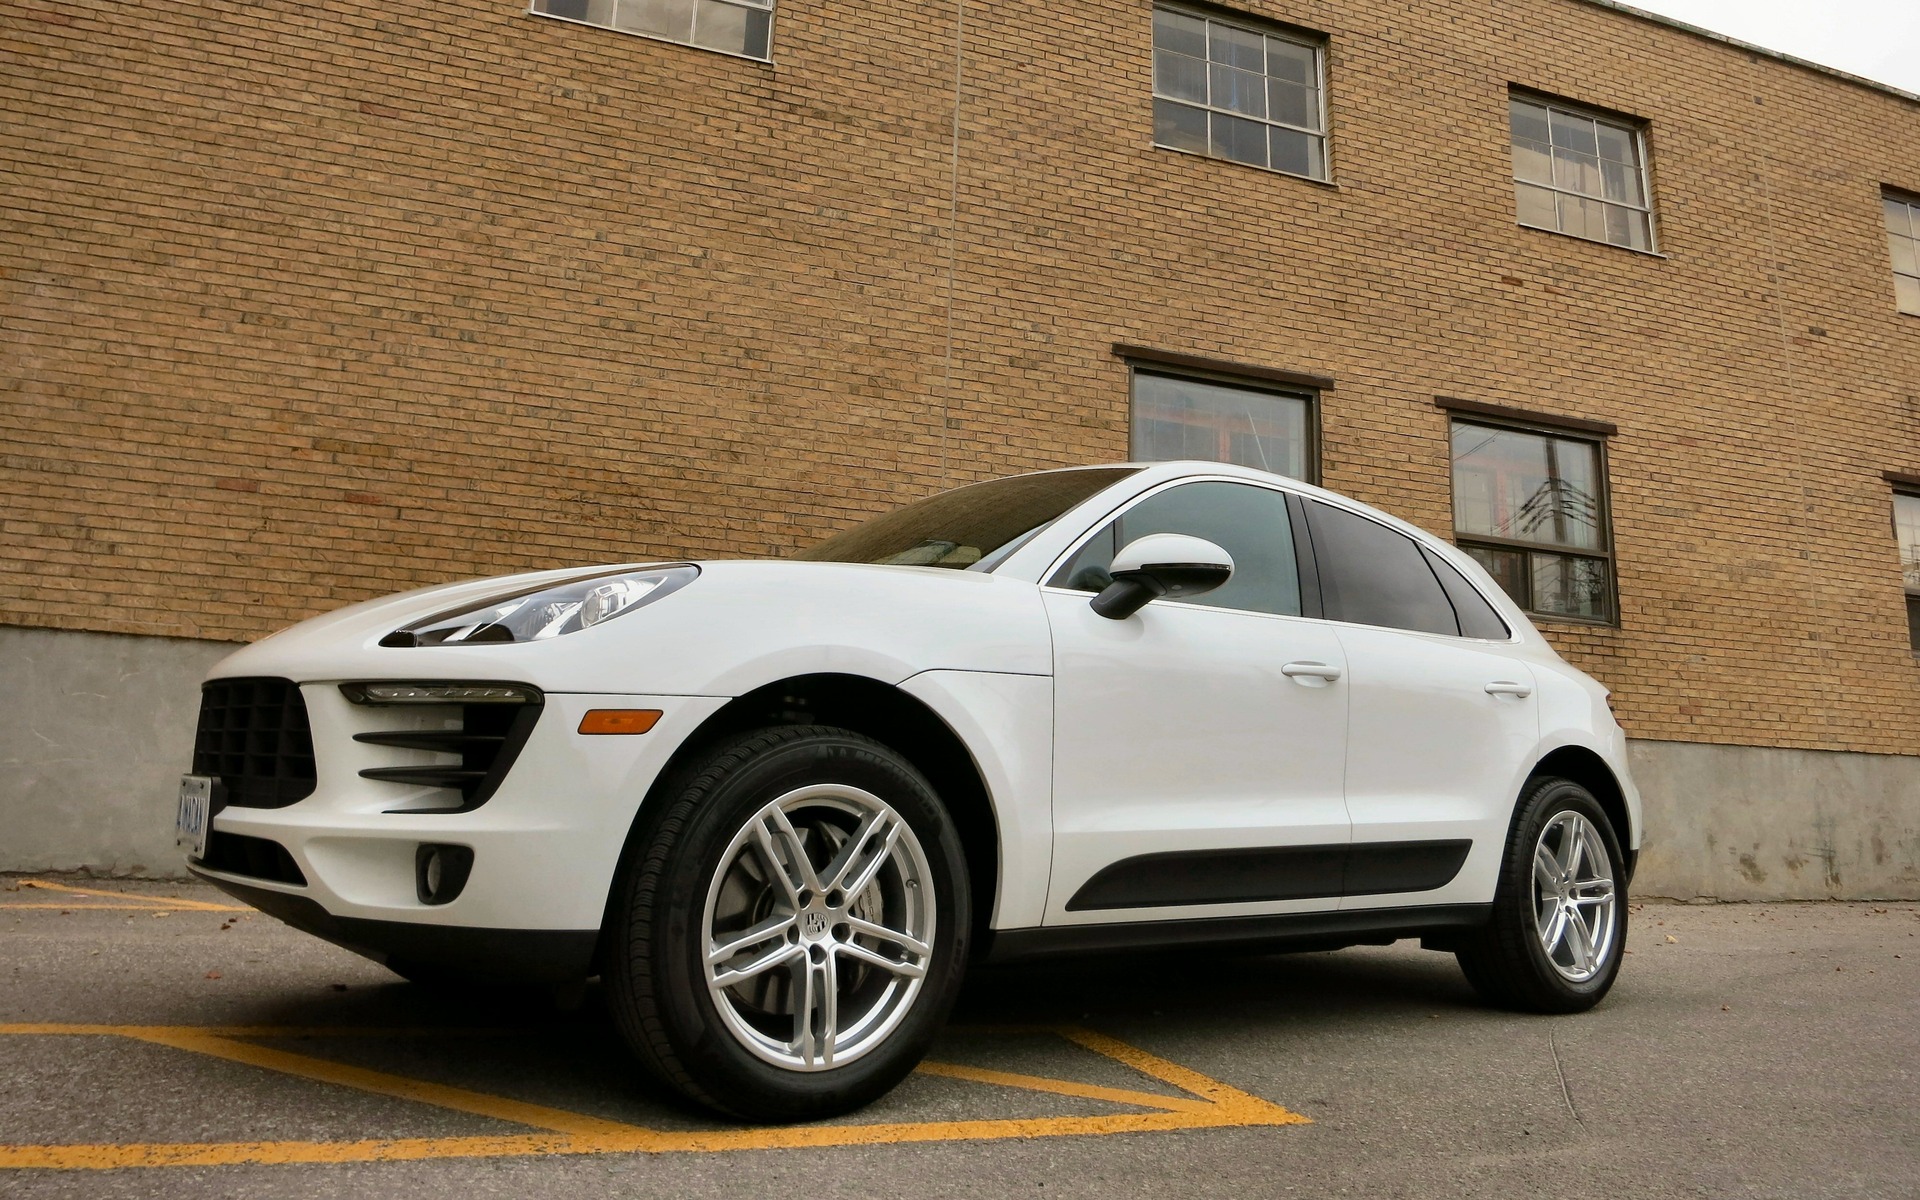 2015 Porsche Macan S: The SUV For Drivers Who Hate SUVs - The Car Guide